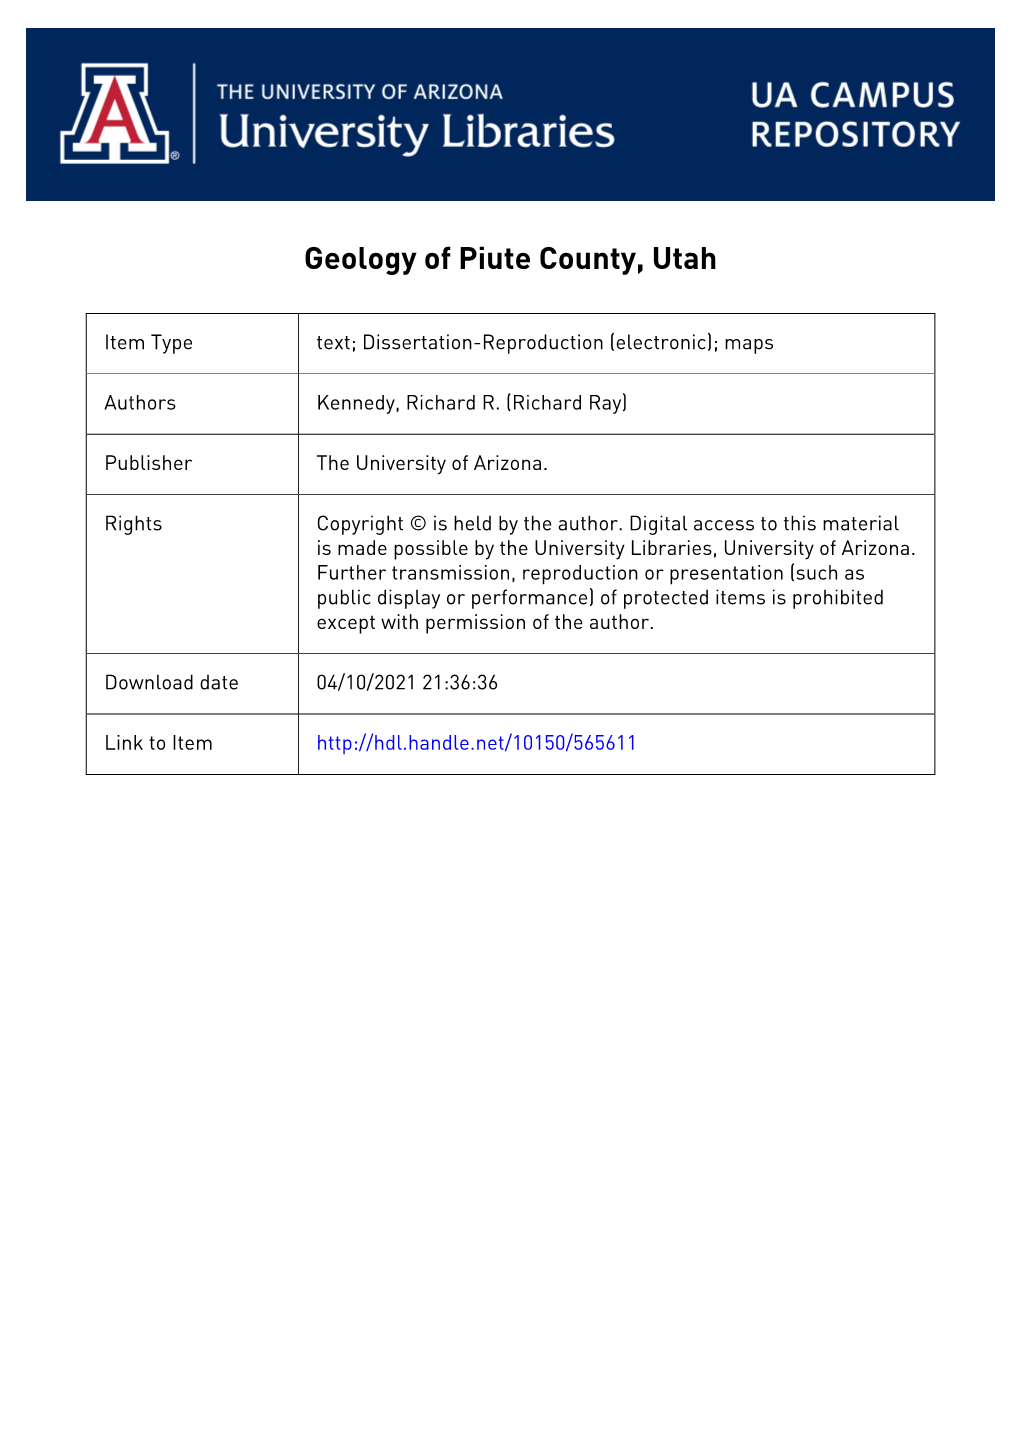 Copyright by Richard Ray Kennedy 1963 Geology of Piute County, Utah